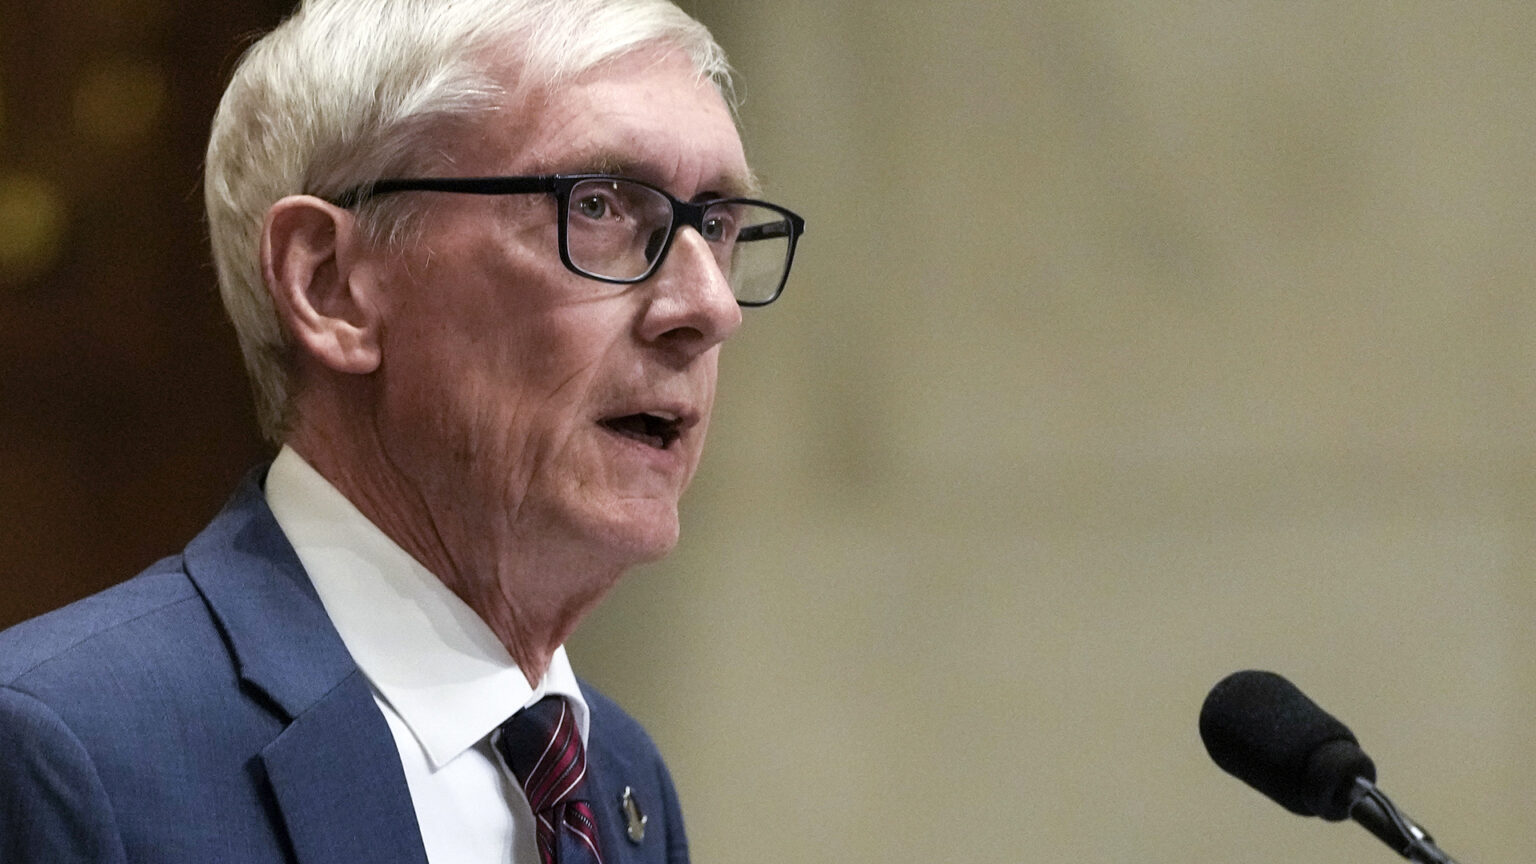 Tony Evers speaks into a microphone.